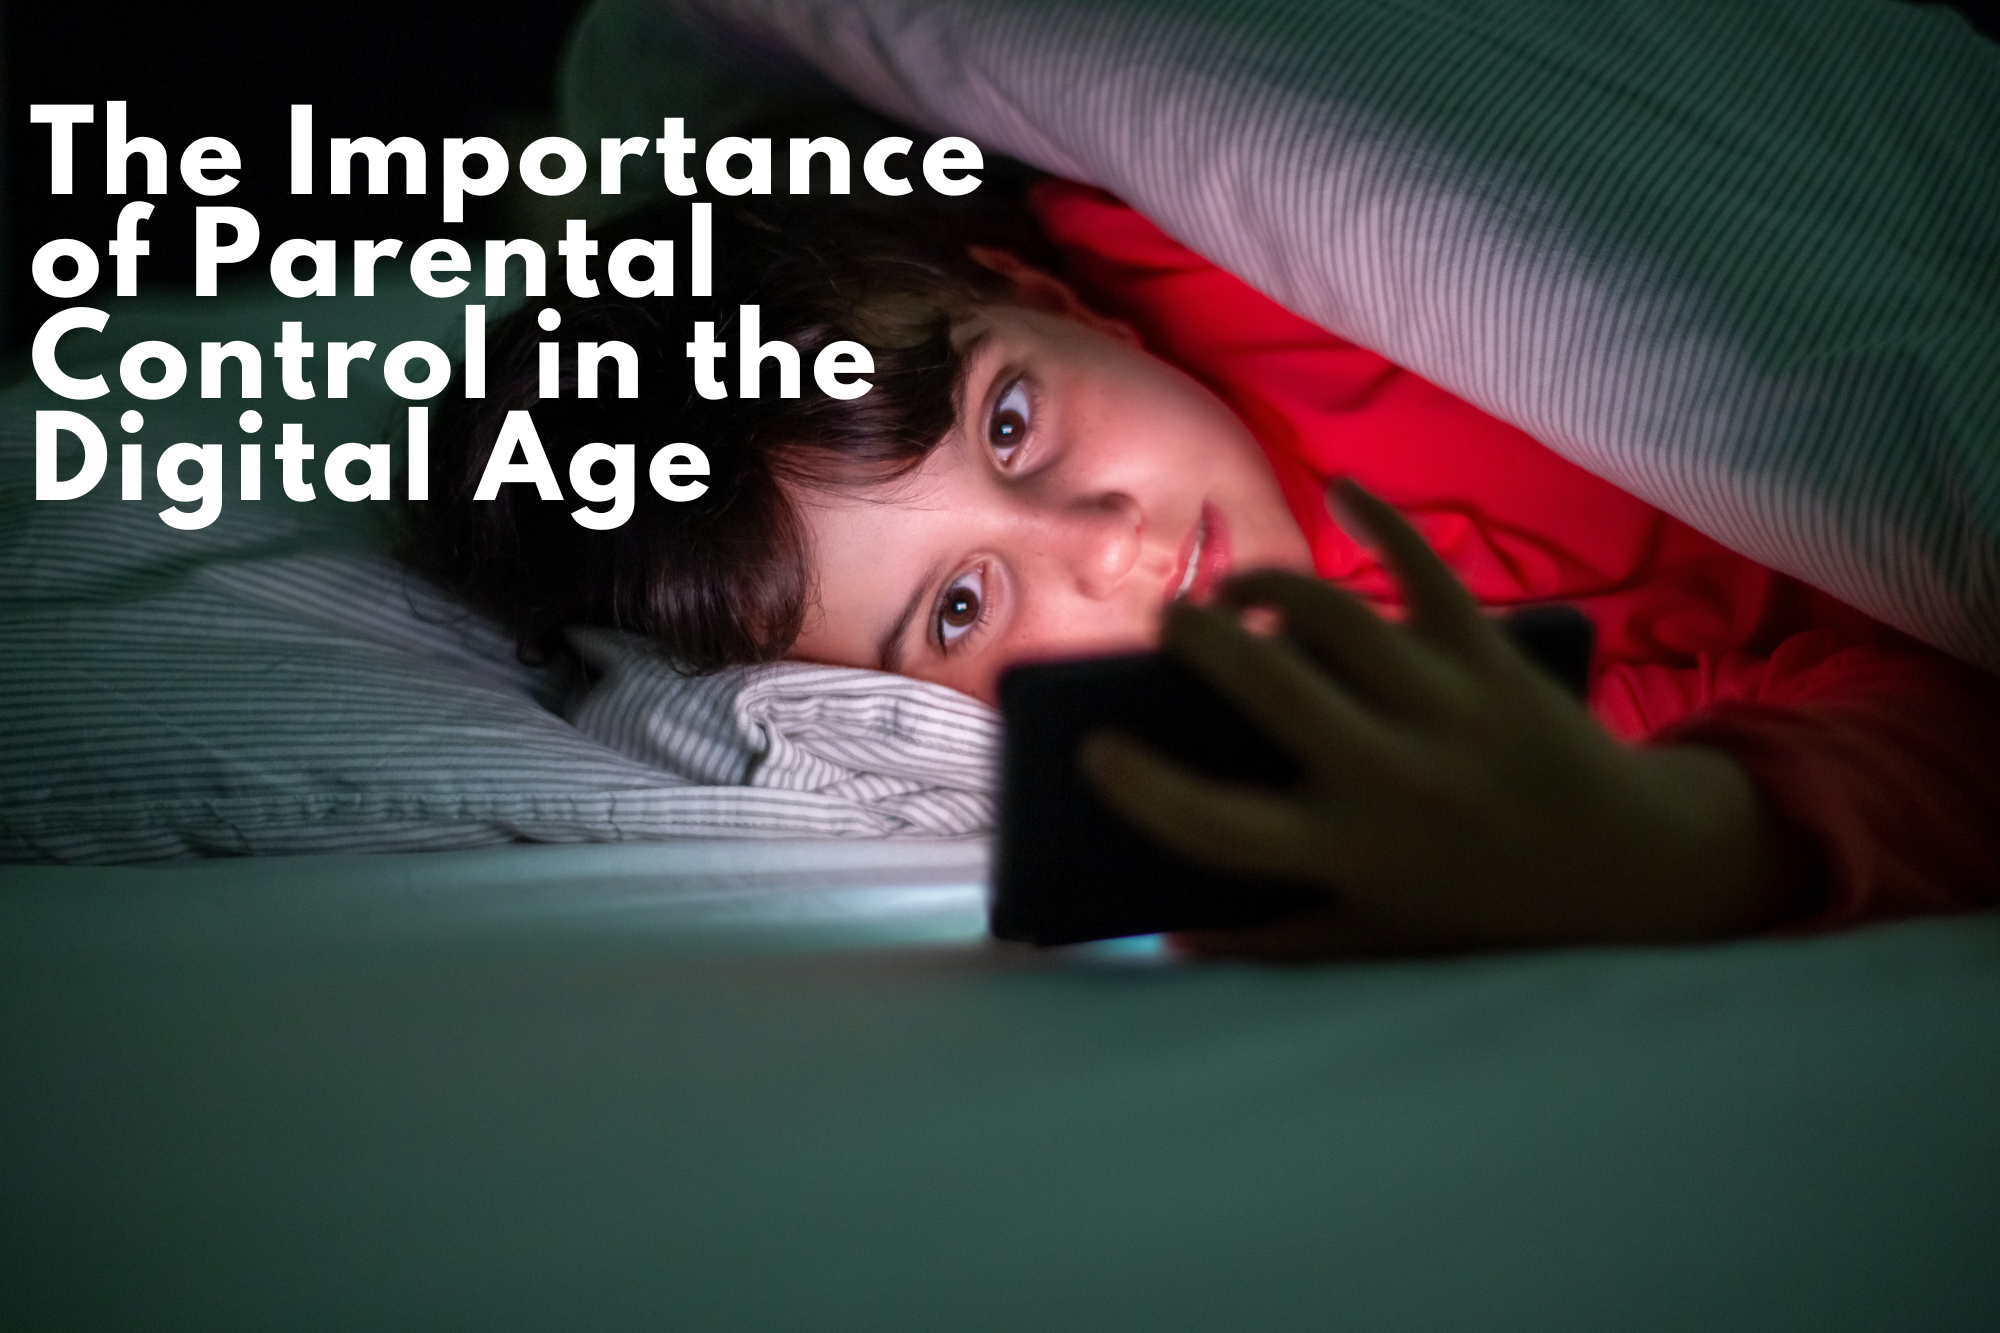 The Importance of Parental Control in the Digital Age